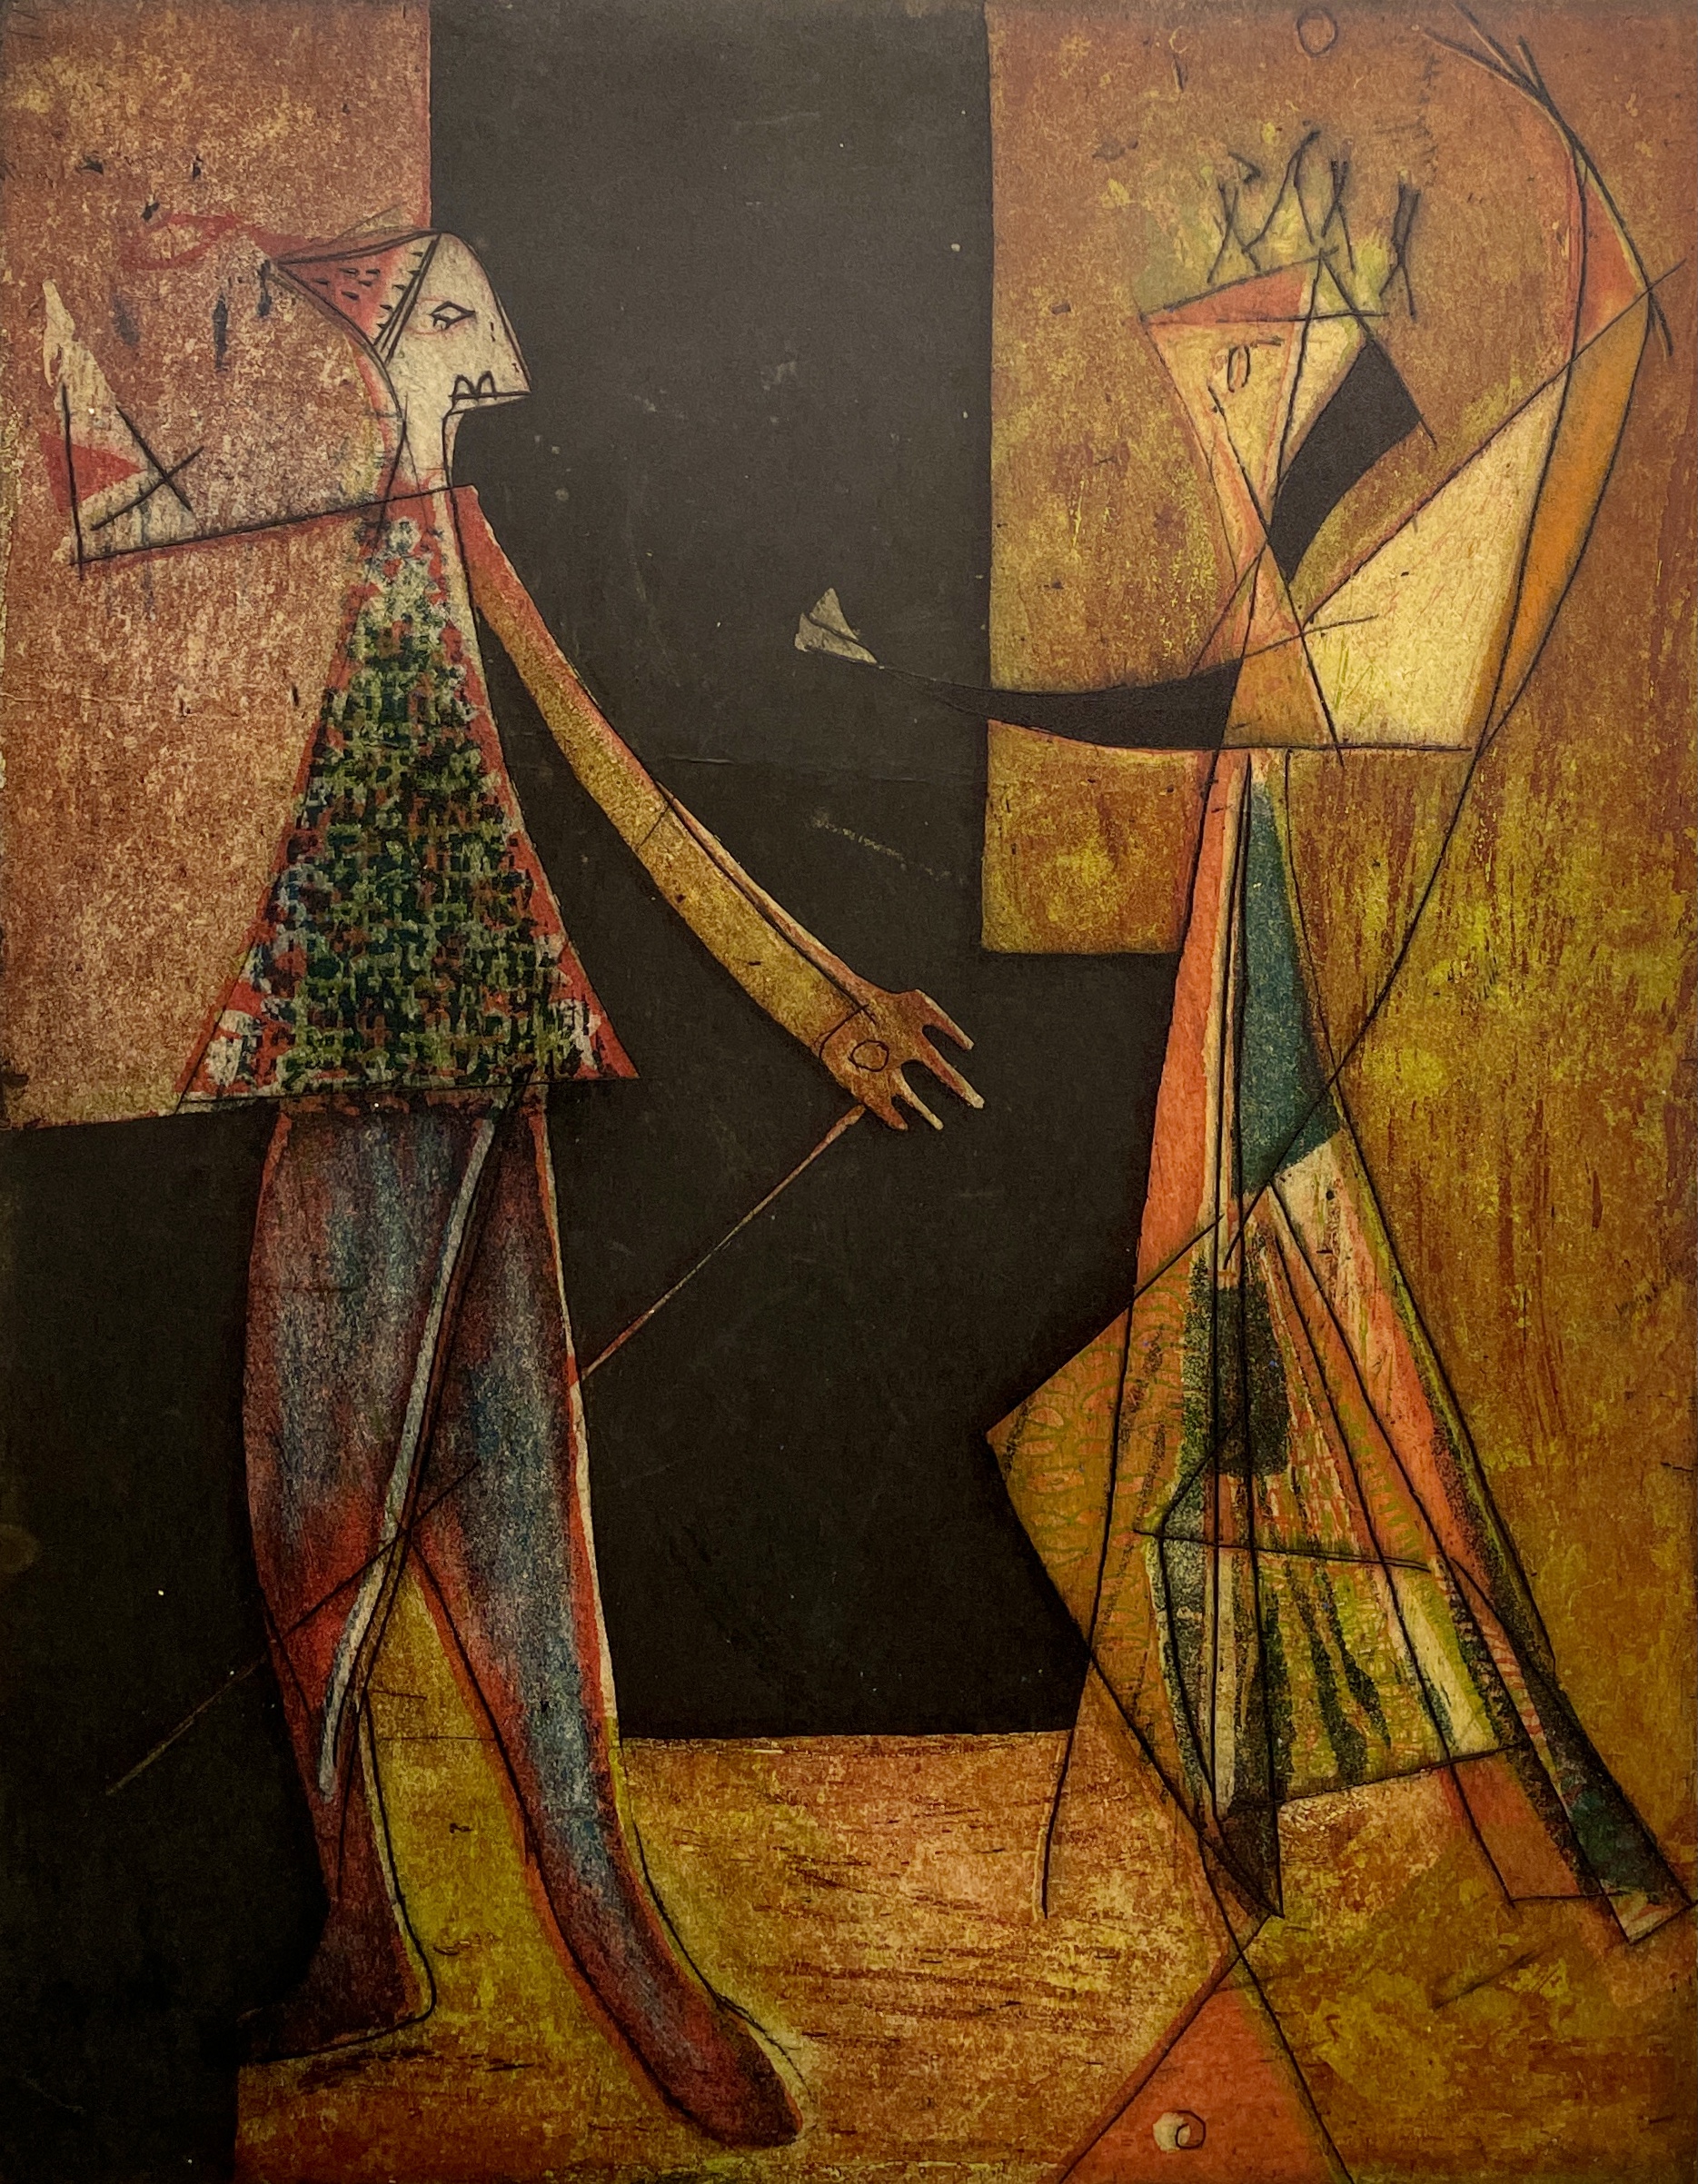 Clown and King (Edition II), 1956